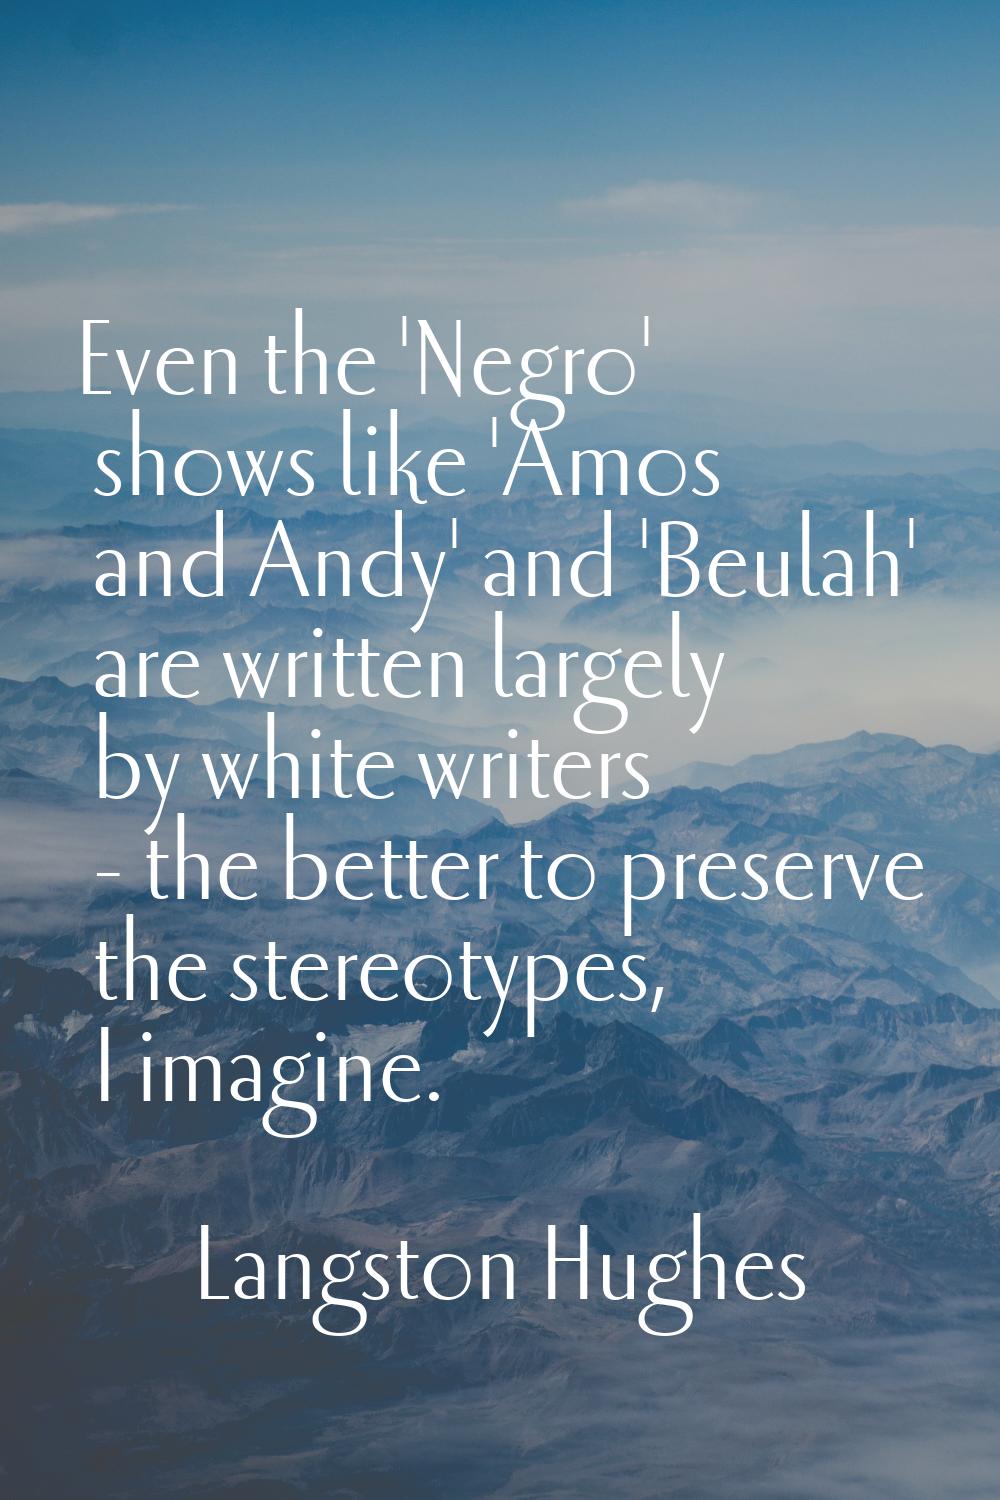 Even the 'Negro' shows like 'Amos and Andy' and 'Beulah' are written largely by white writers - the